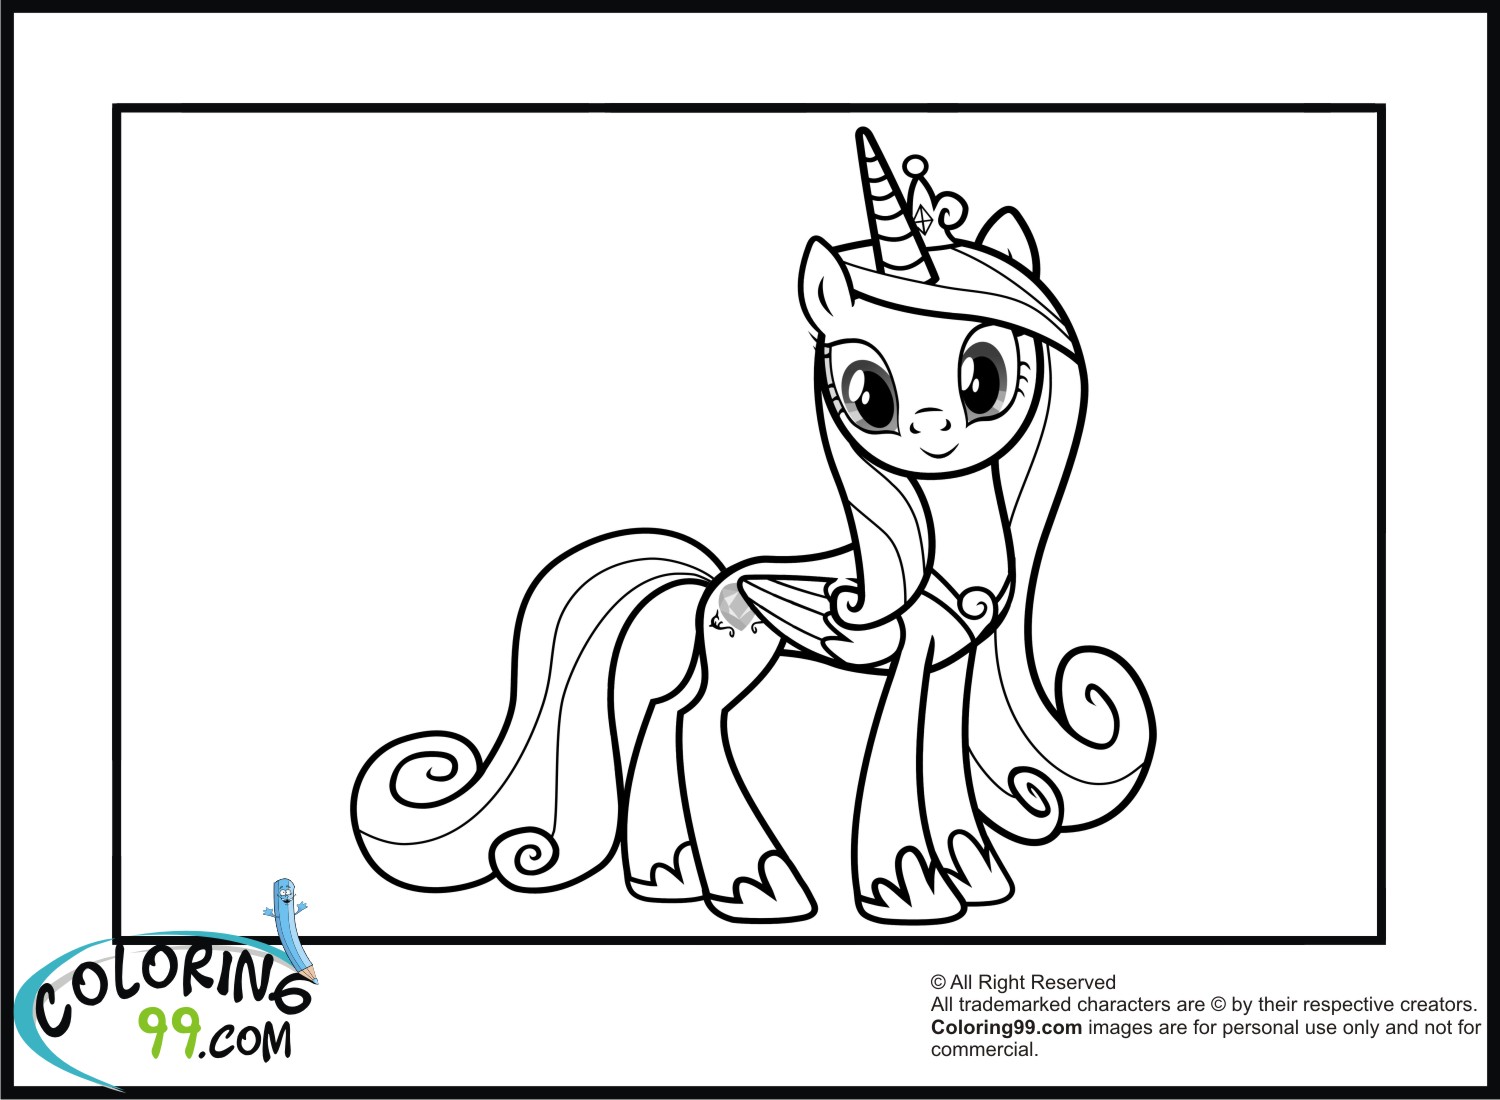 Mlp princess cadence coloring pages free image download